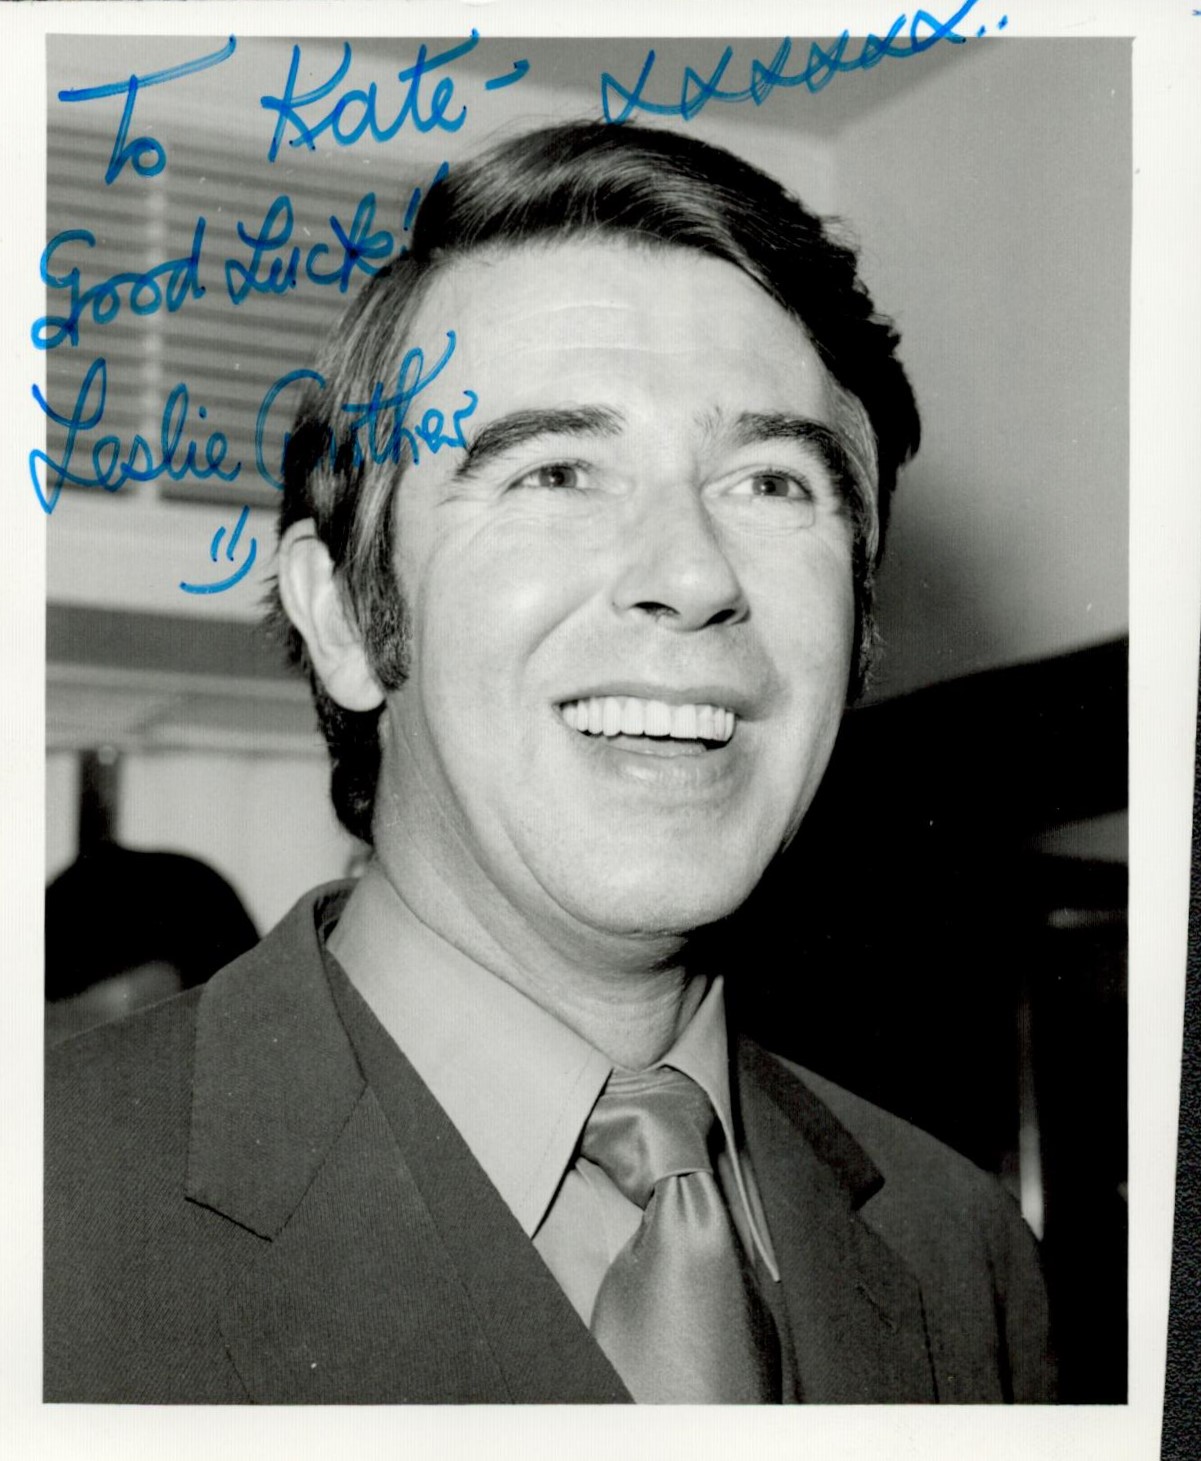 TV Film Leslie Crowther signed 5 x 5 black and white photo. Leslie Douglas Sargent Crowther, CBE was